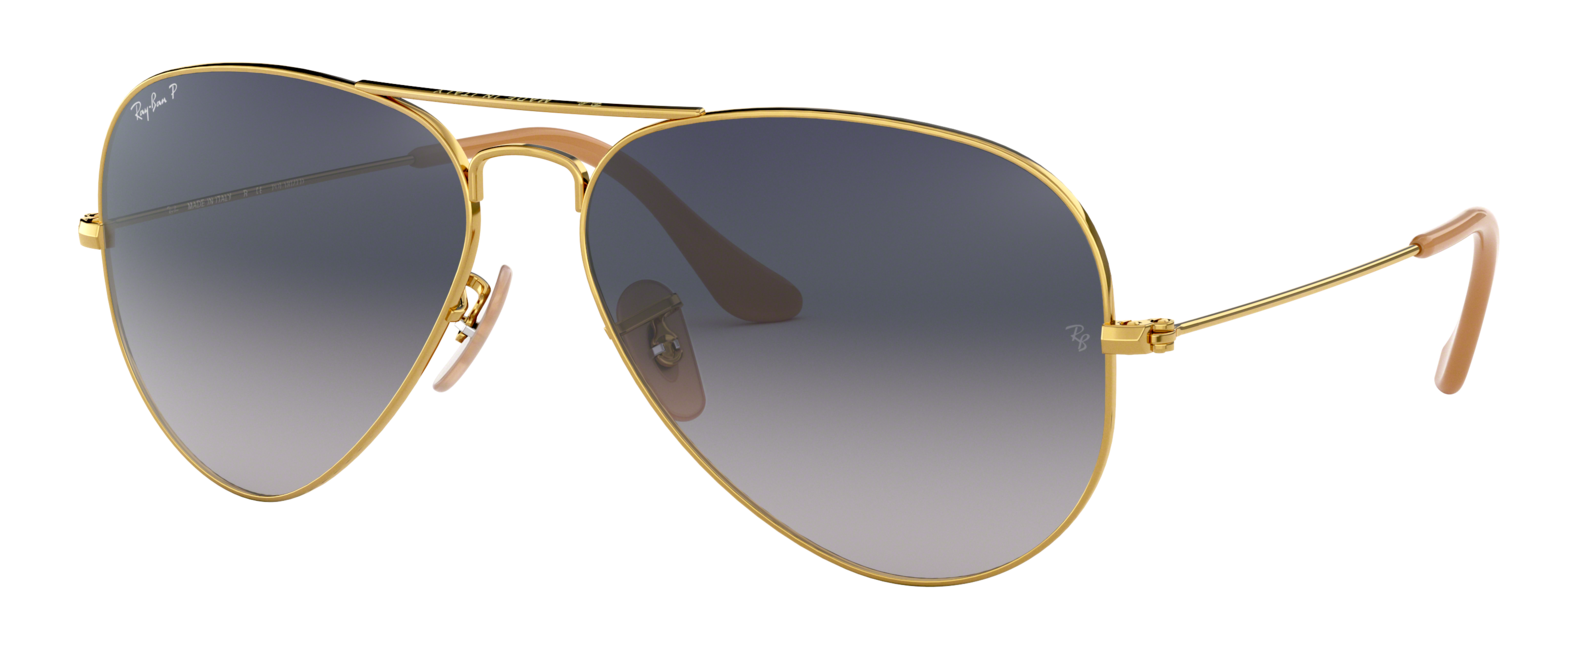 Ray-Ban RB3025 Aviator driving sunglasses in gold with gradient blue lenses.